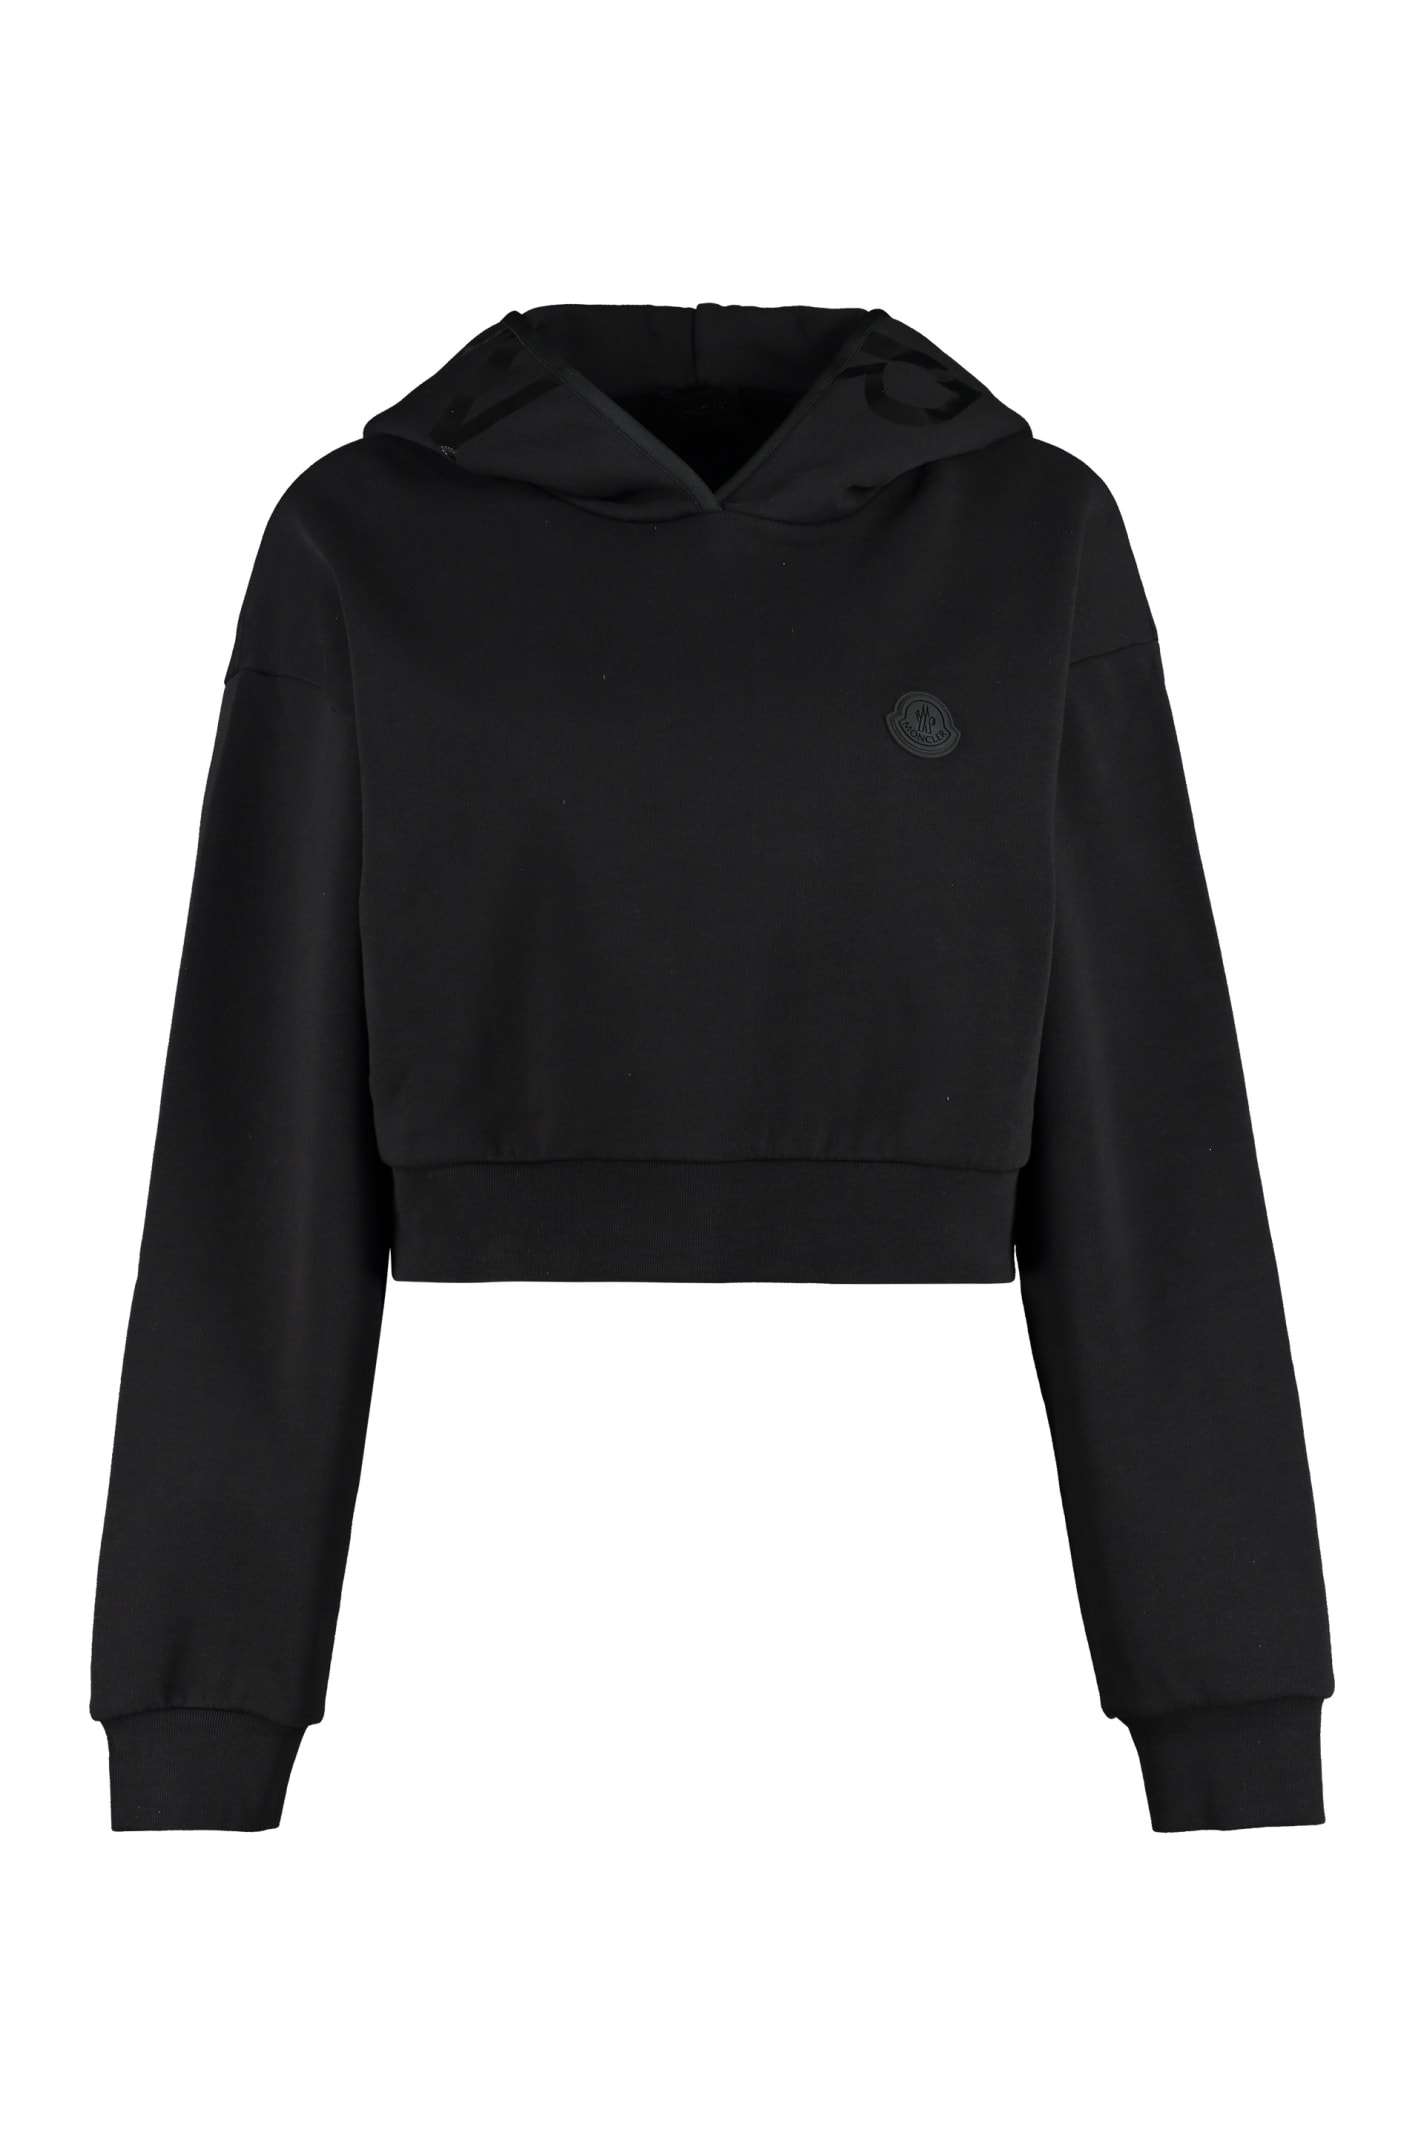 MONCLER CROPPED HOODIE,8G787-10 809LC 999